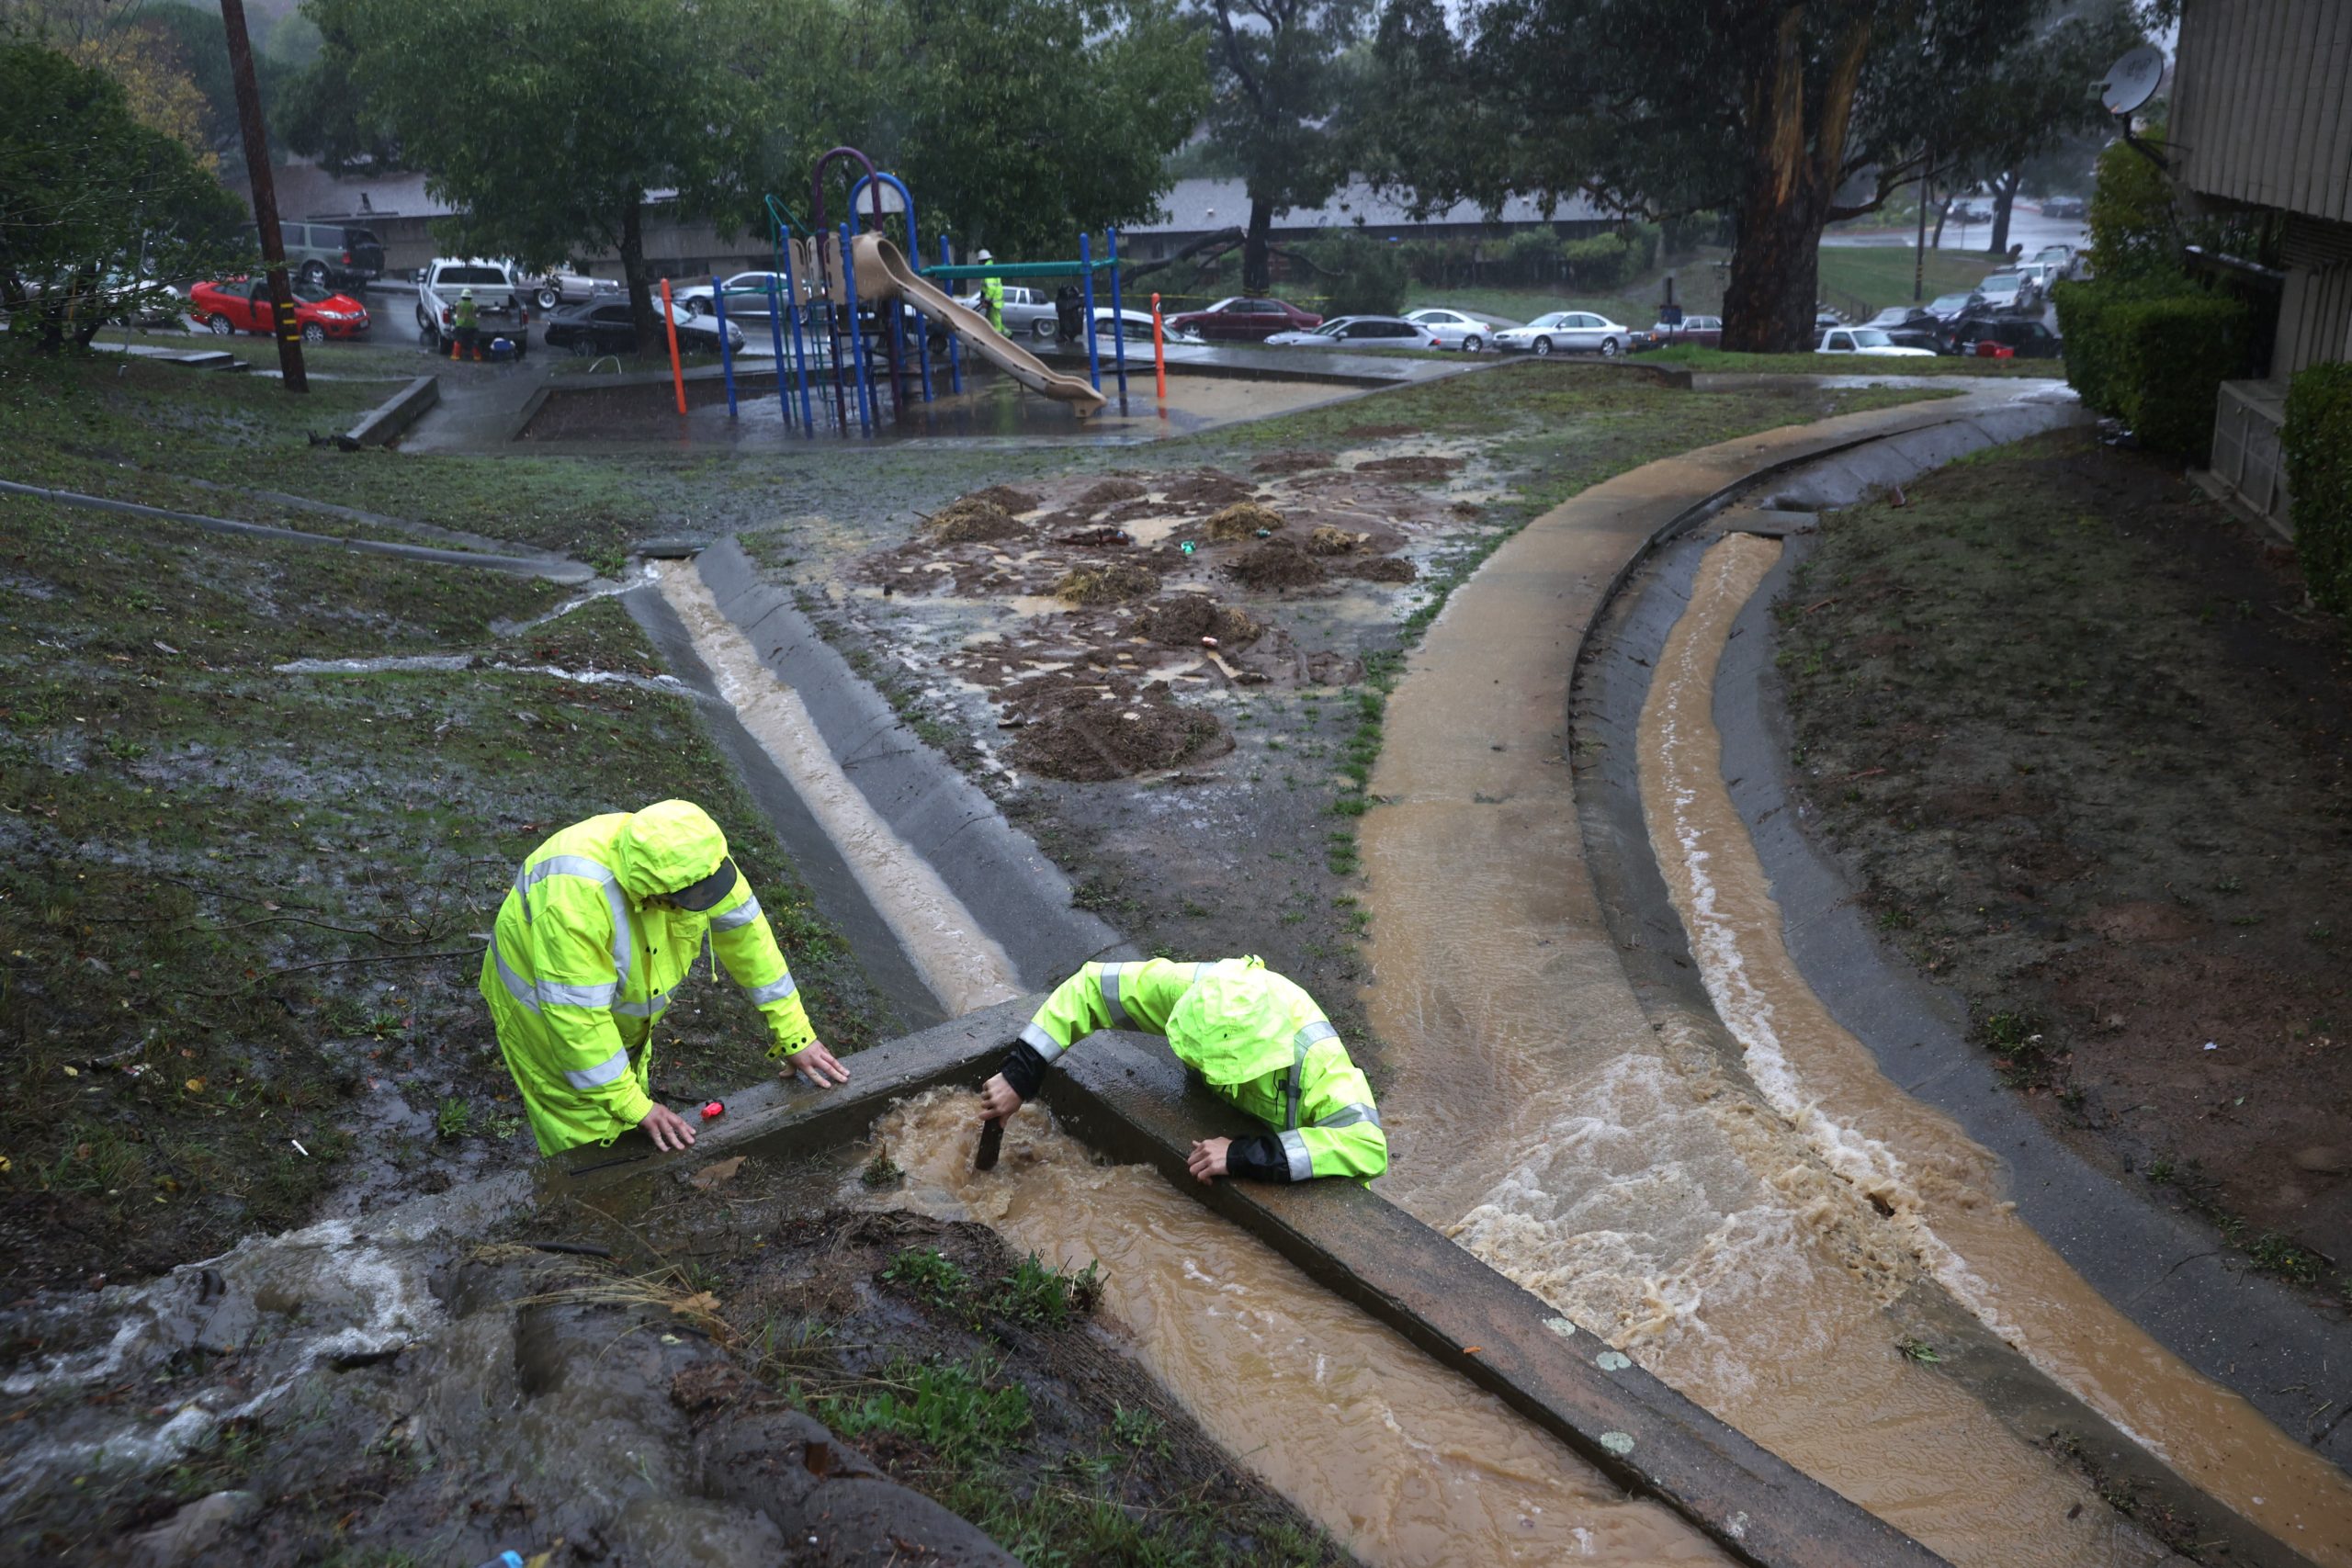 Workers try to divert water into drains as rain pours down on October 24, 2021 in Marin City, California. (Photo: Justin Sullivan, Getty Images)